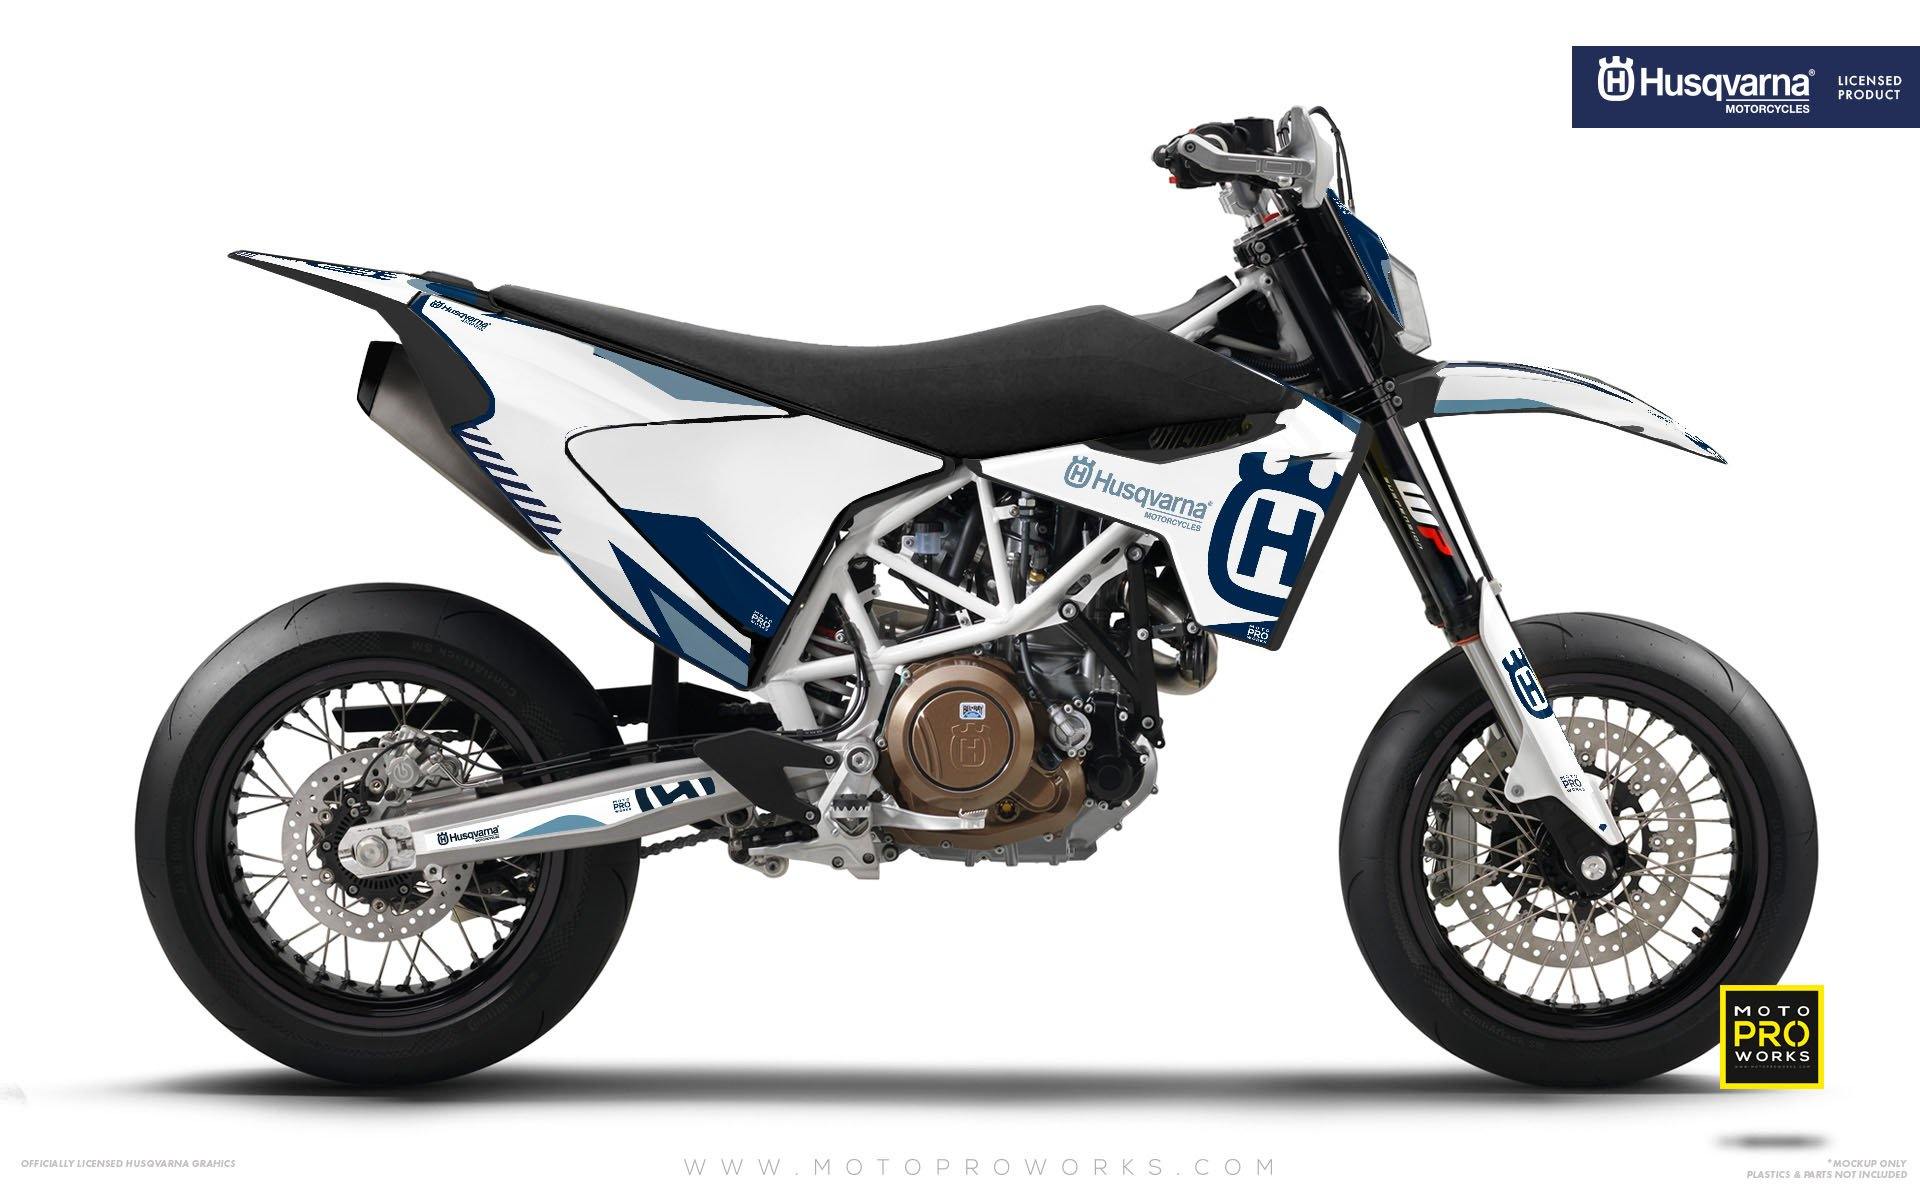 Husqvarna GRAPHIC KIT - "FACTOR" (White/blue) - MotoProWorks | Decals and Bike Graphic kit